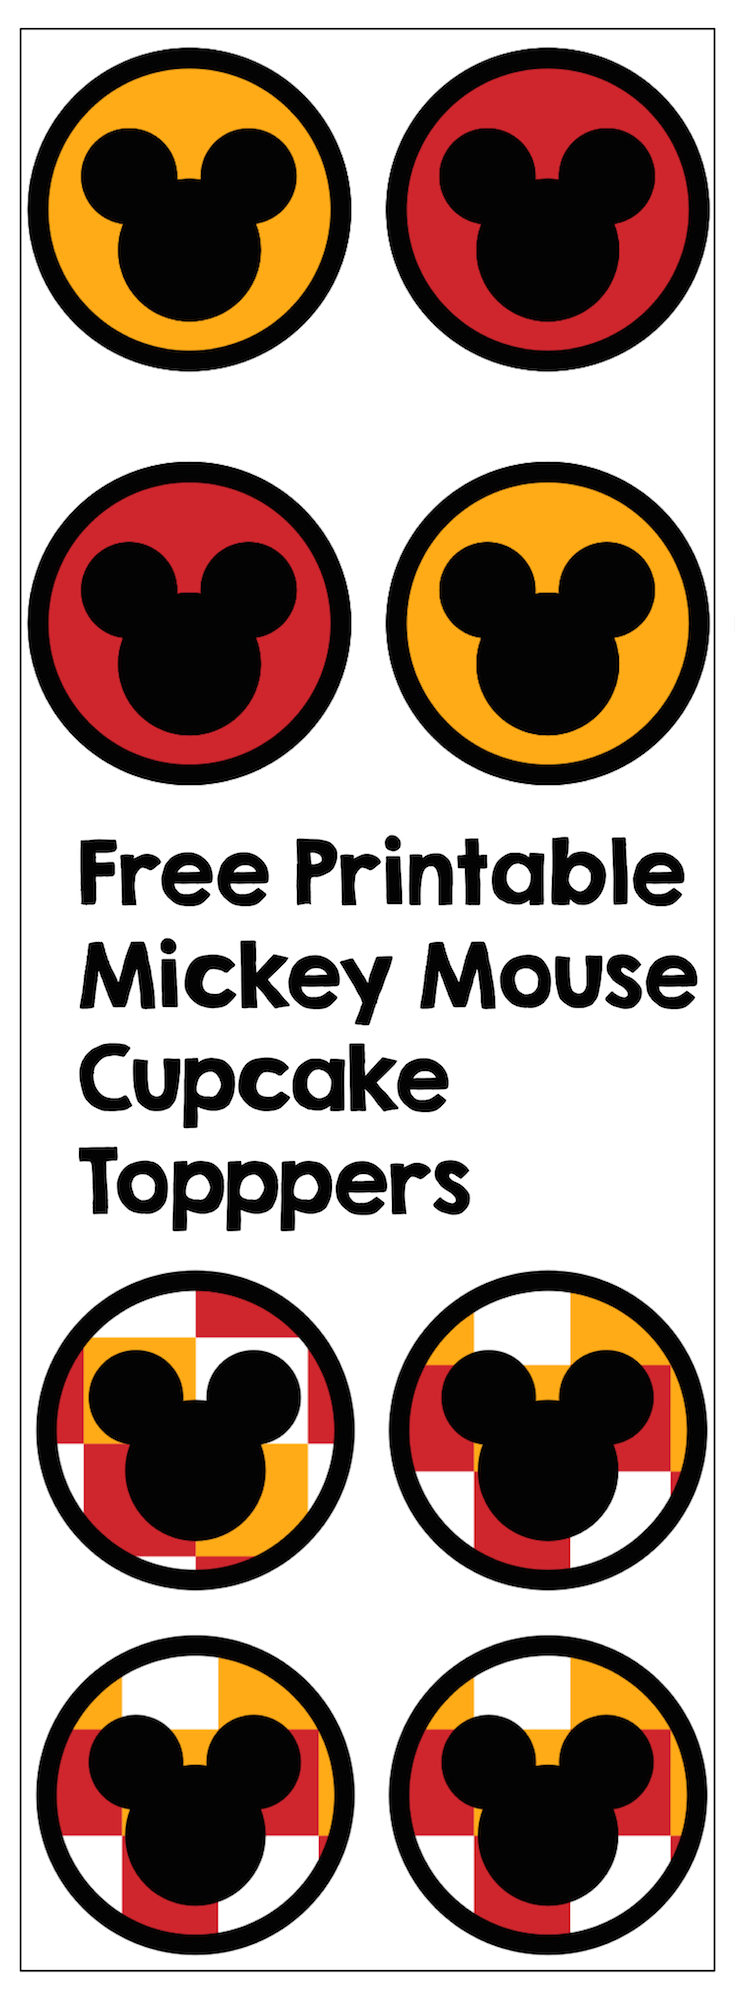 Mickey Mouse Cupcake Toppers free printable. Print these Mickey Mouse cupcake toppers for your Disney birthday party. Just print and cut. So easy!